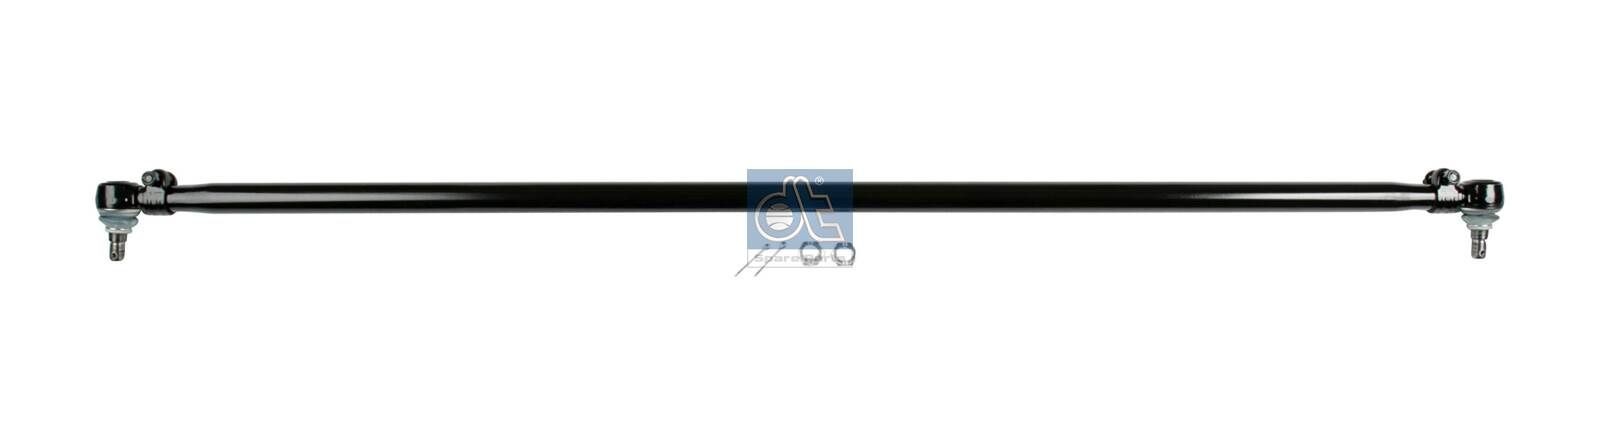 DT Spare Parts 4.65330 Rod Assembly 670 330 0603